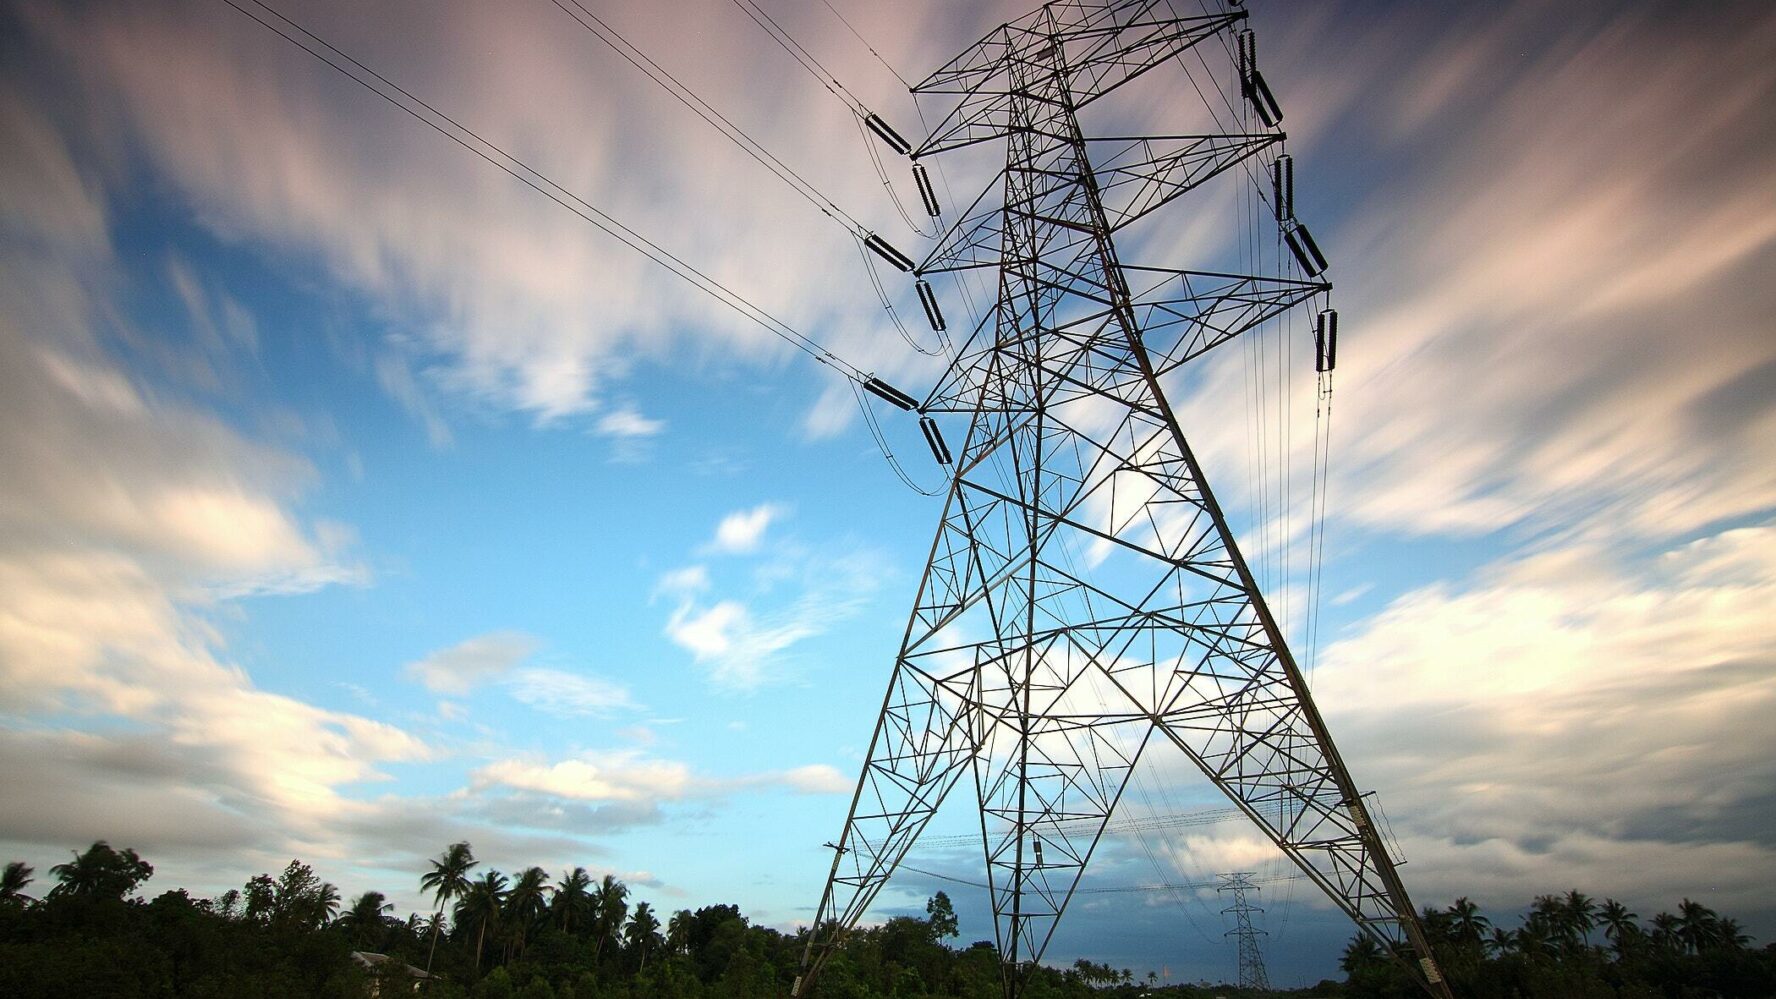 An electricity pylon in front of an atmospheric cloudy sky.